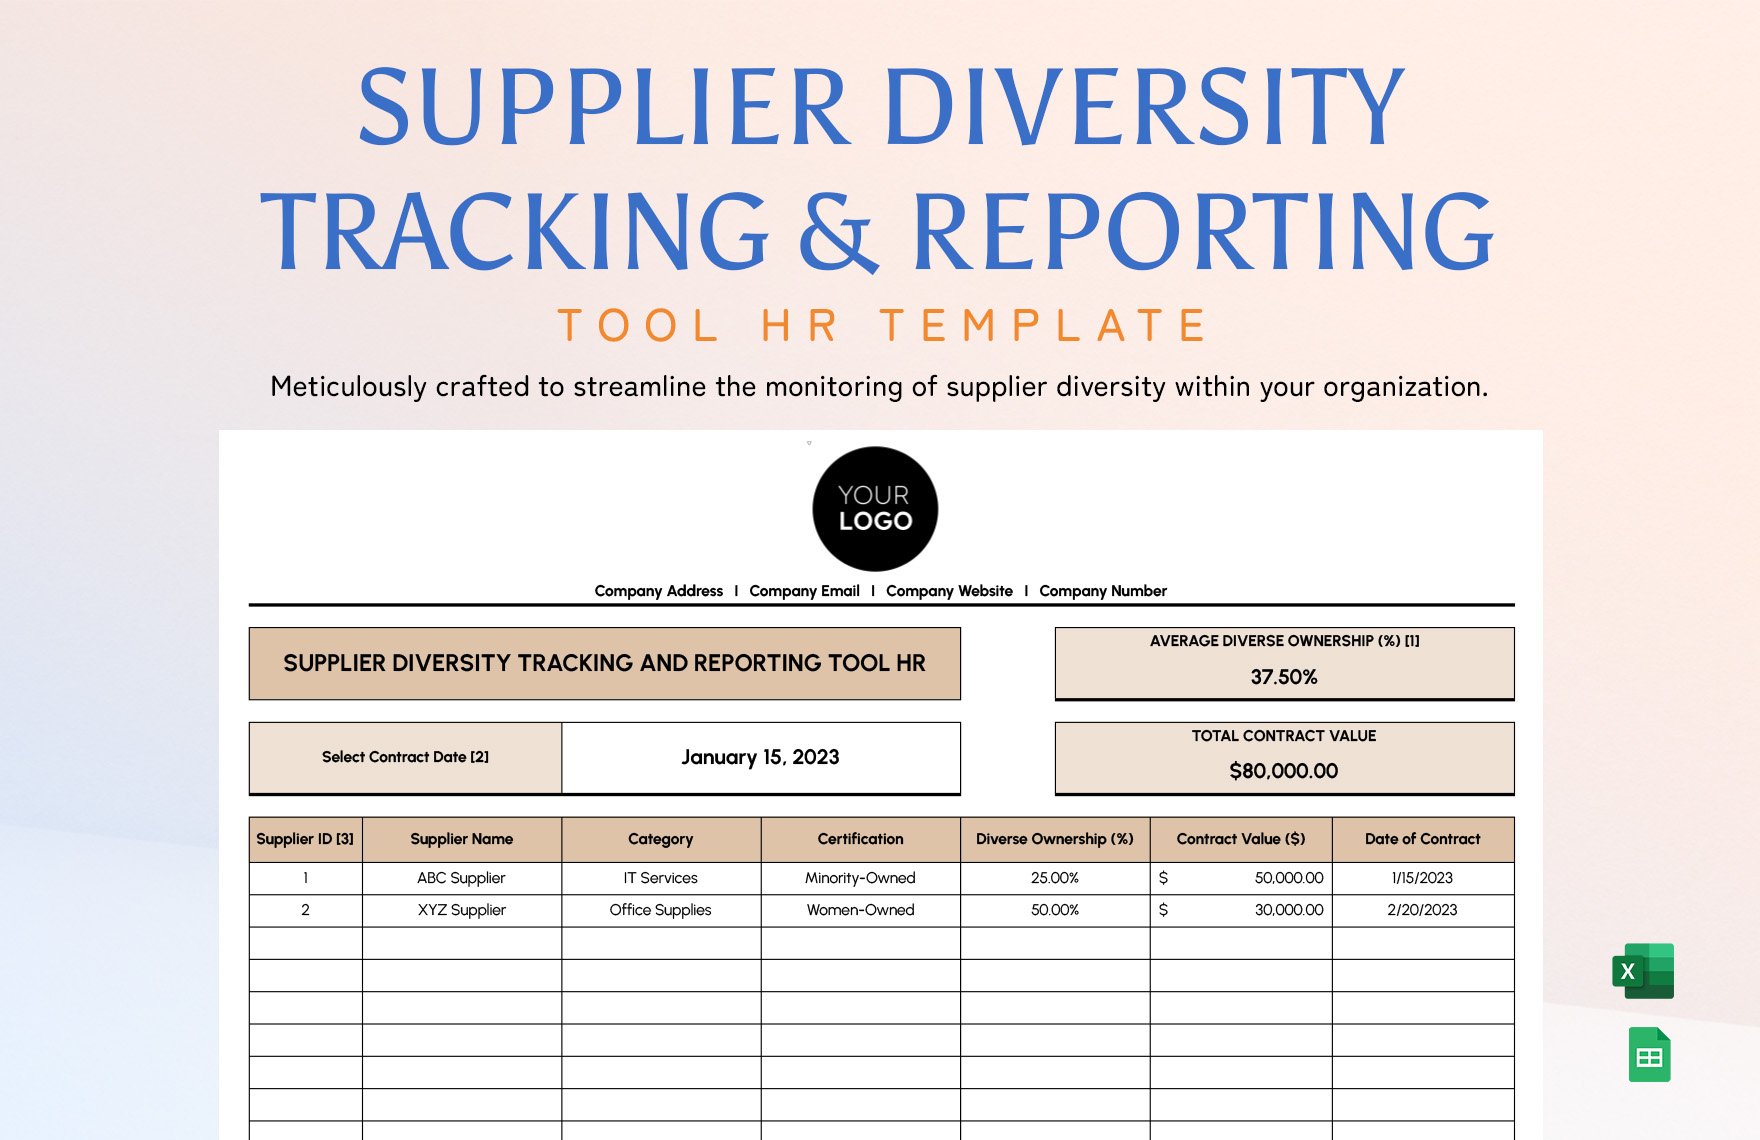 Supplier Diversity Tracking and Reporting Tool HR Template